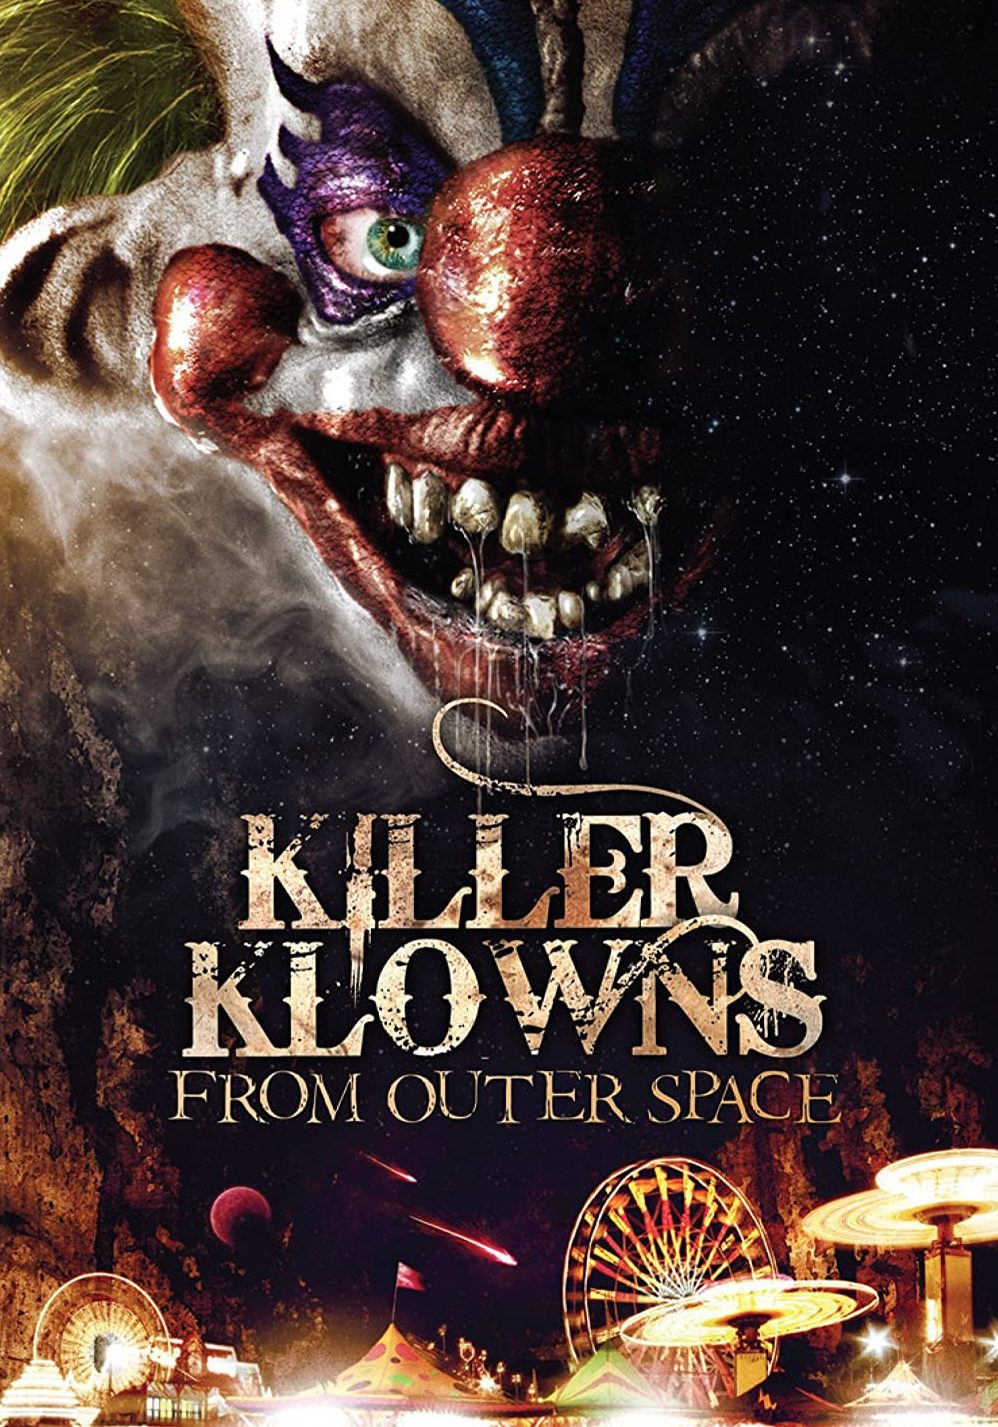 Killer Klowns from Outer Space [HD] (1988)